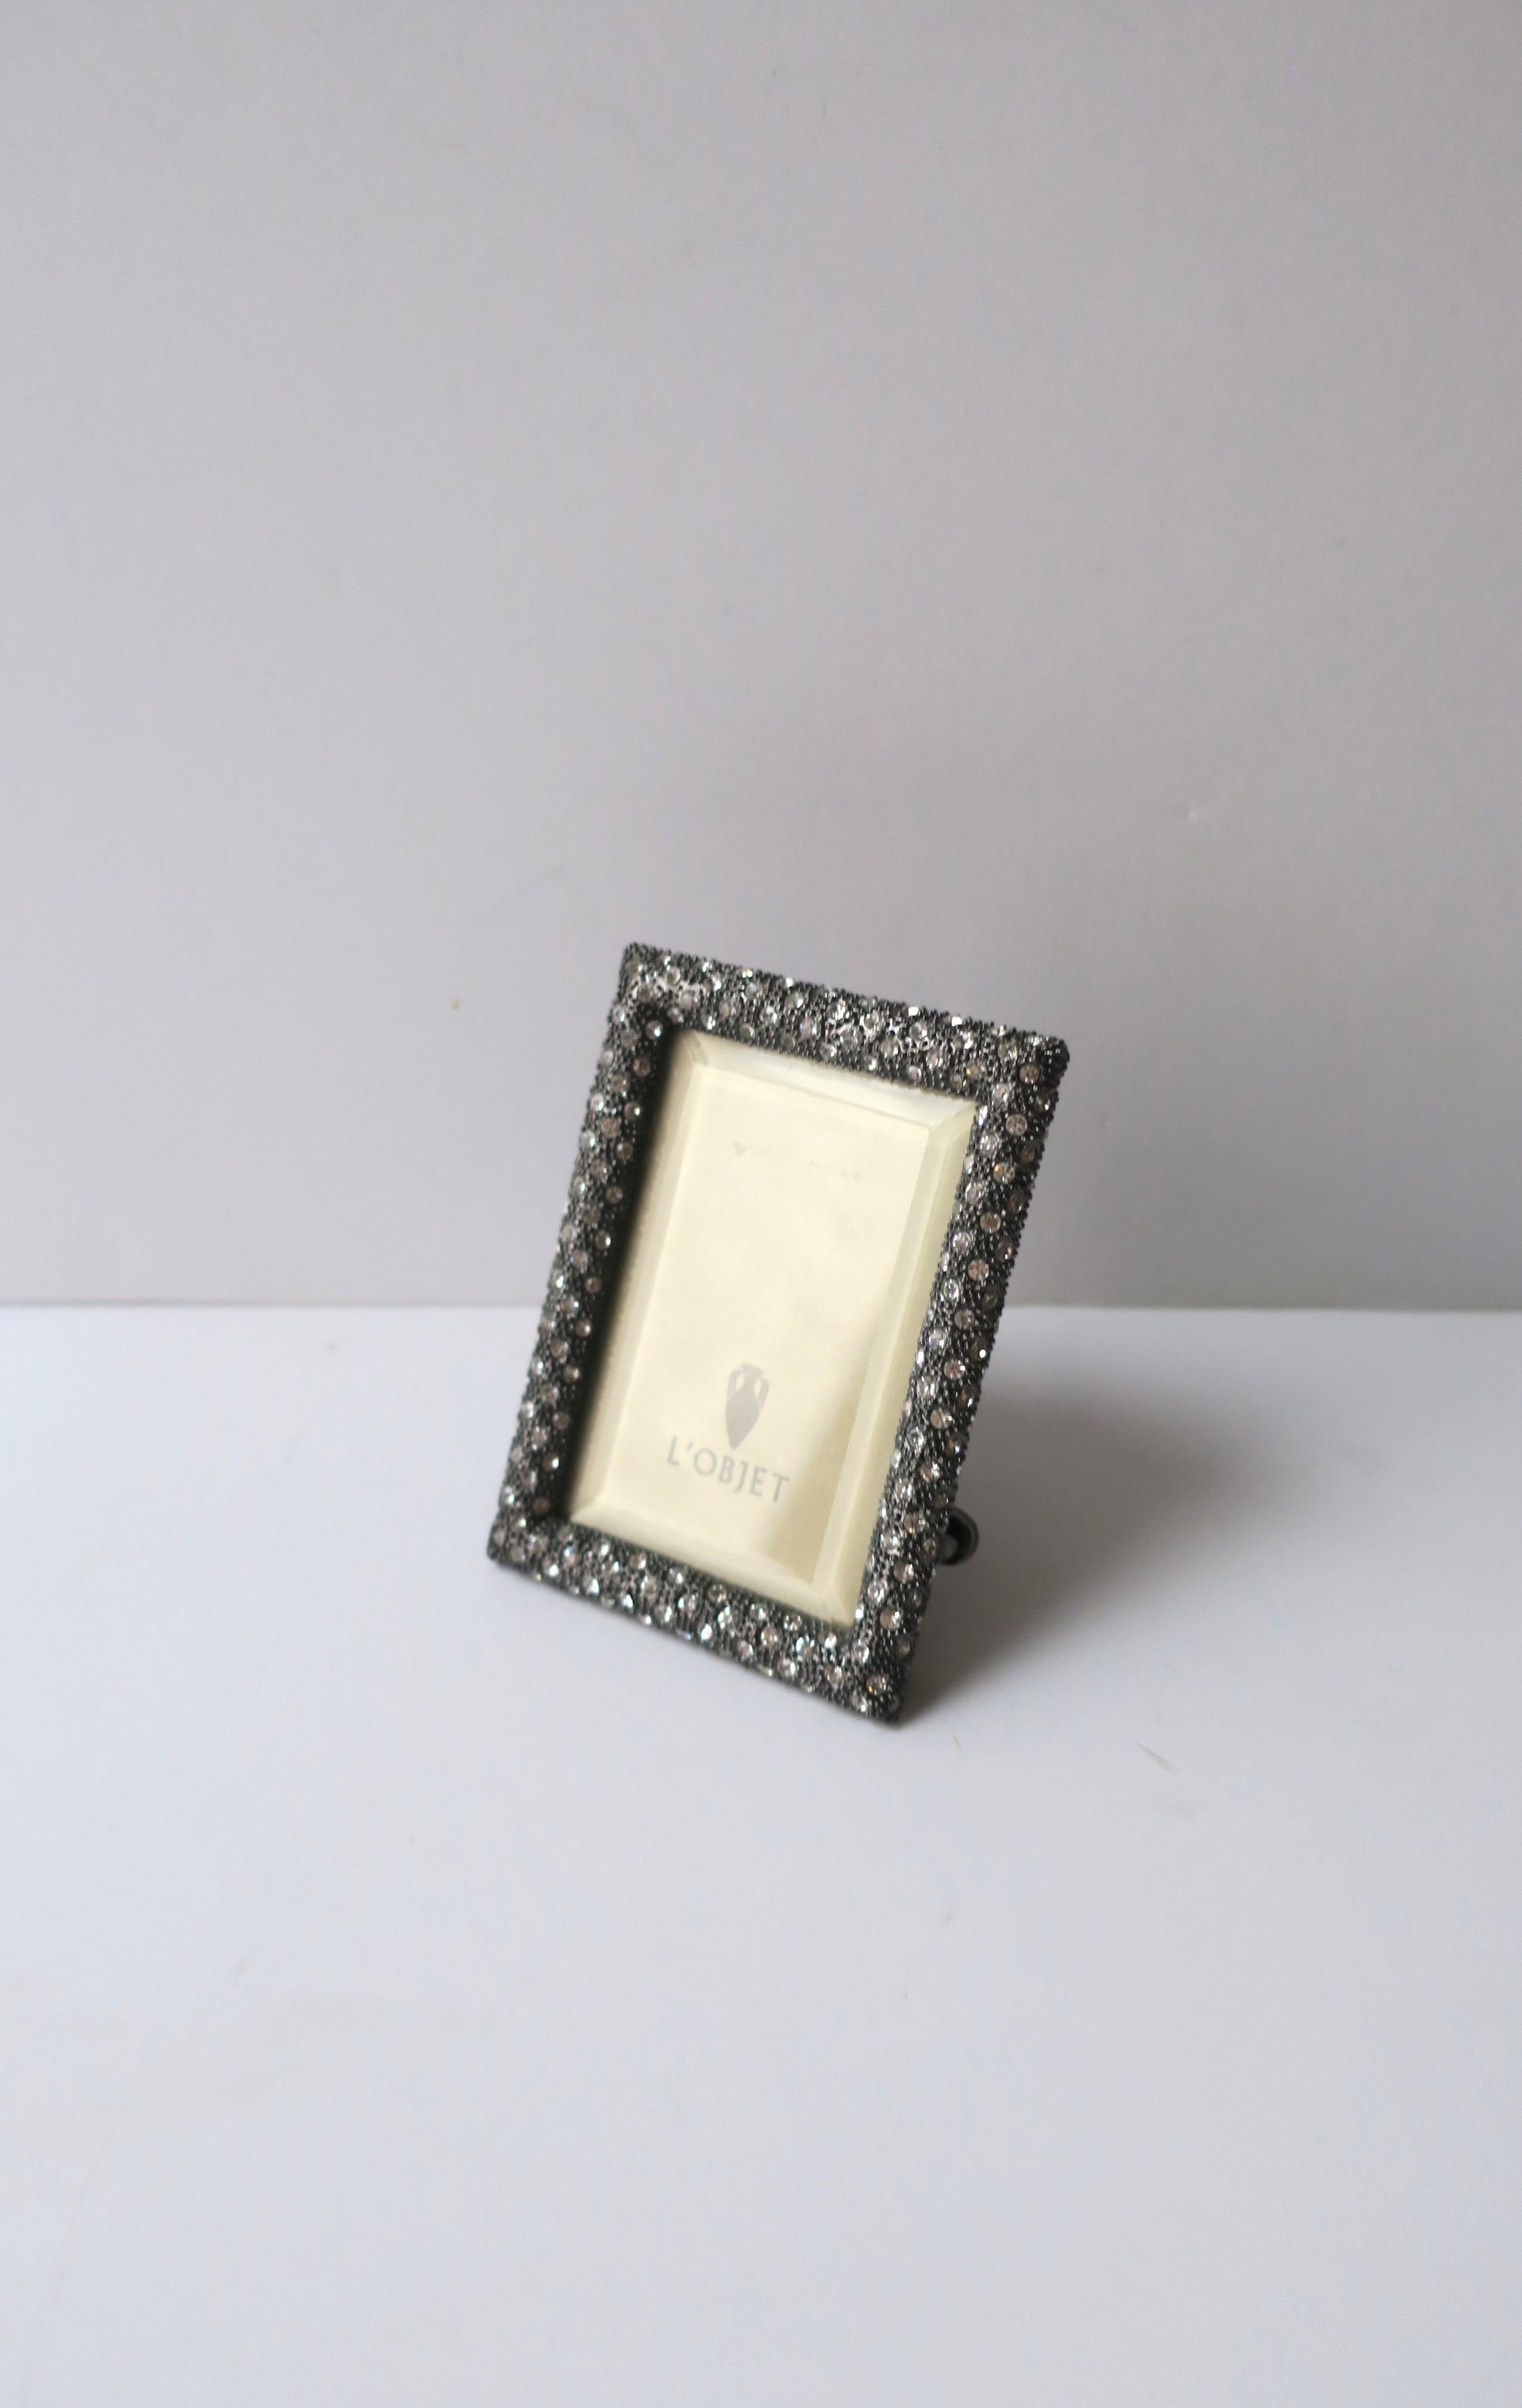 A very beautiful and substantial rectangular picture frame carefully designed and handcrafted with platinum plating, pave set clear/transparent Swarovski crystals, and beveled glass. Dimensions: 2.63